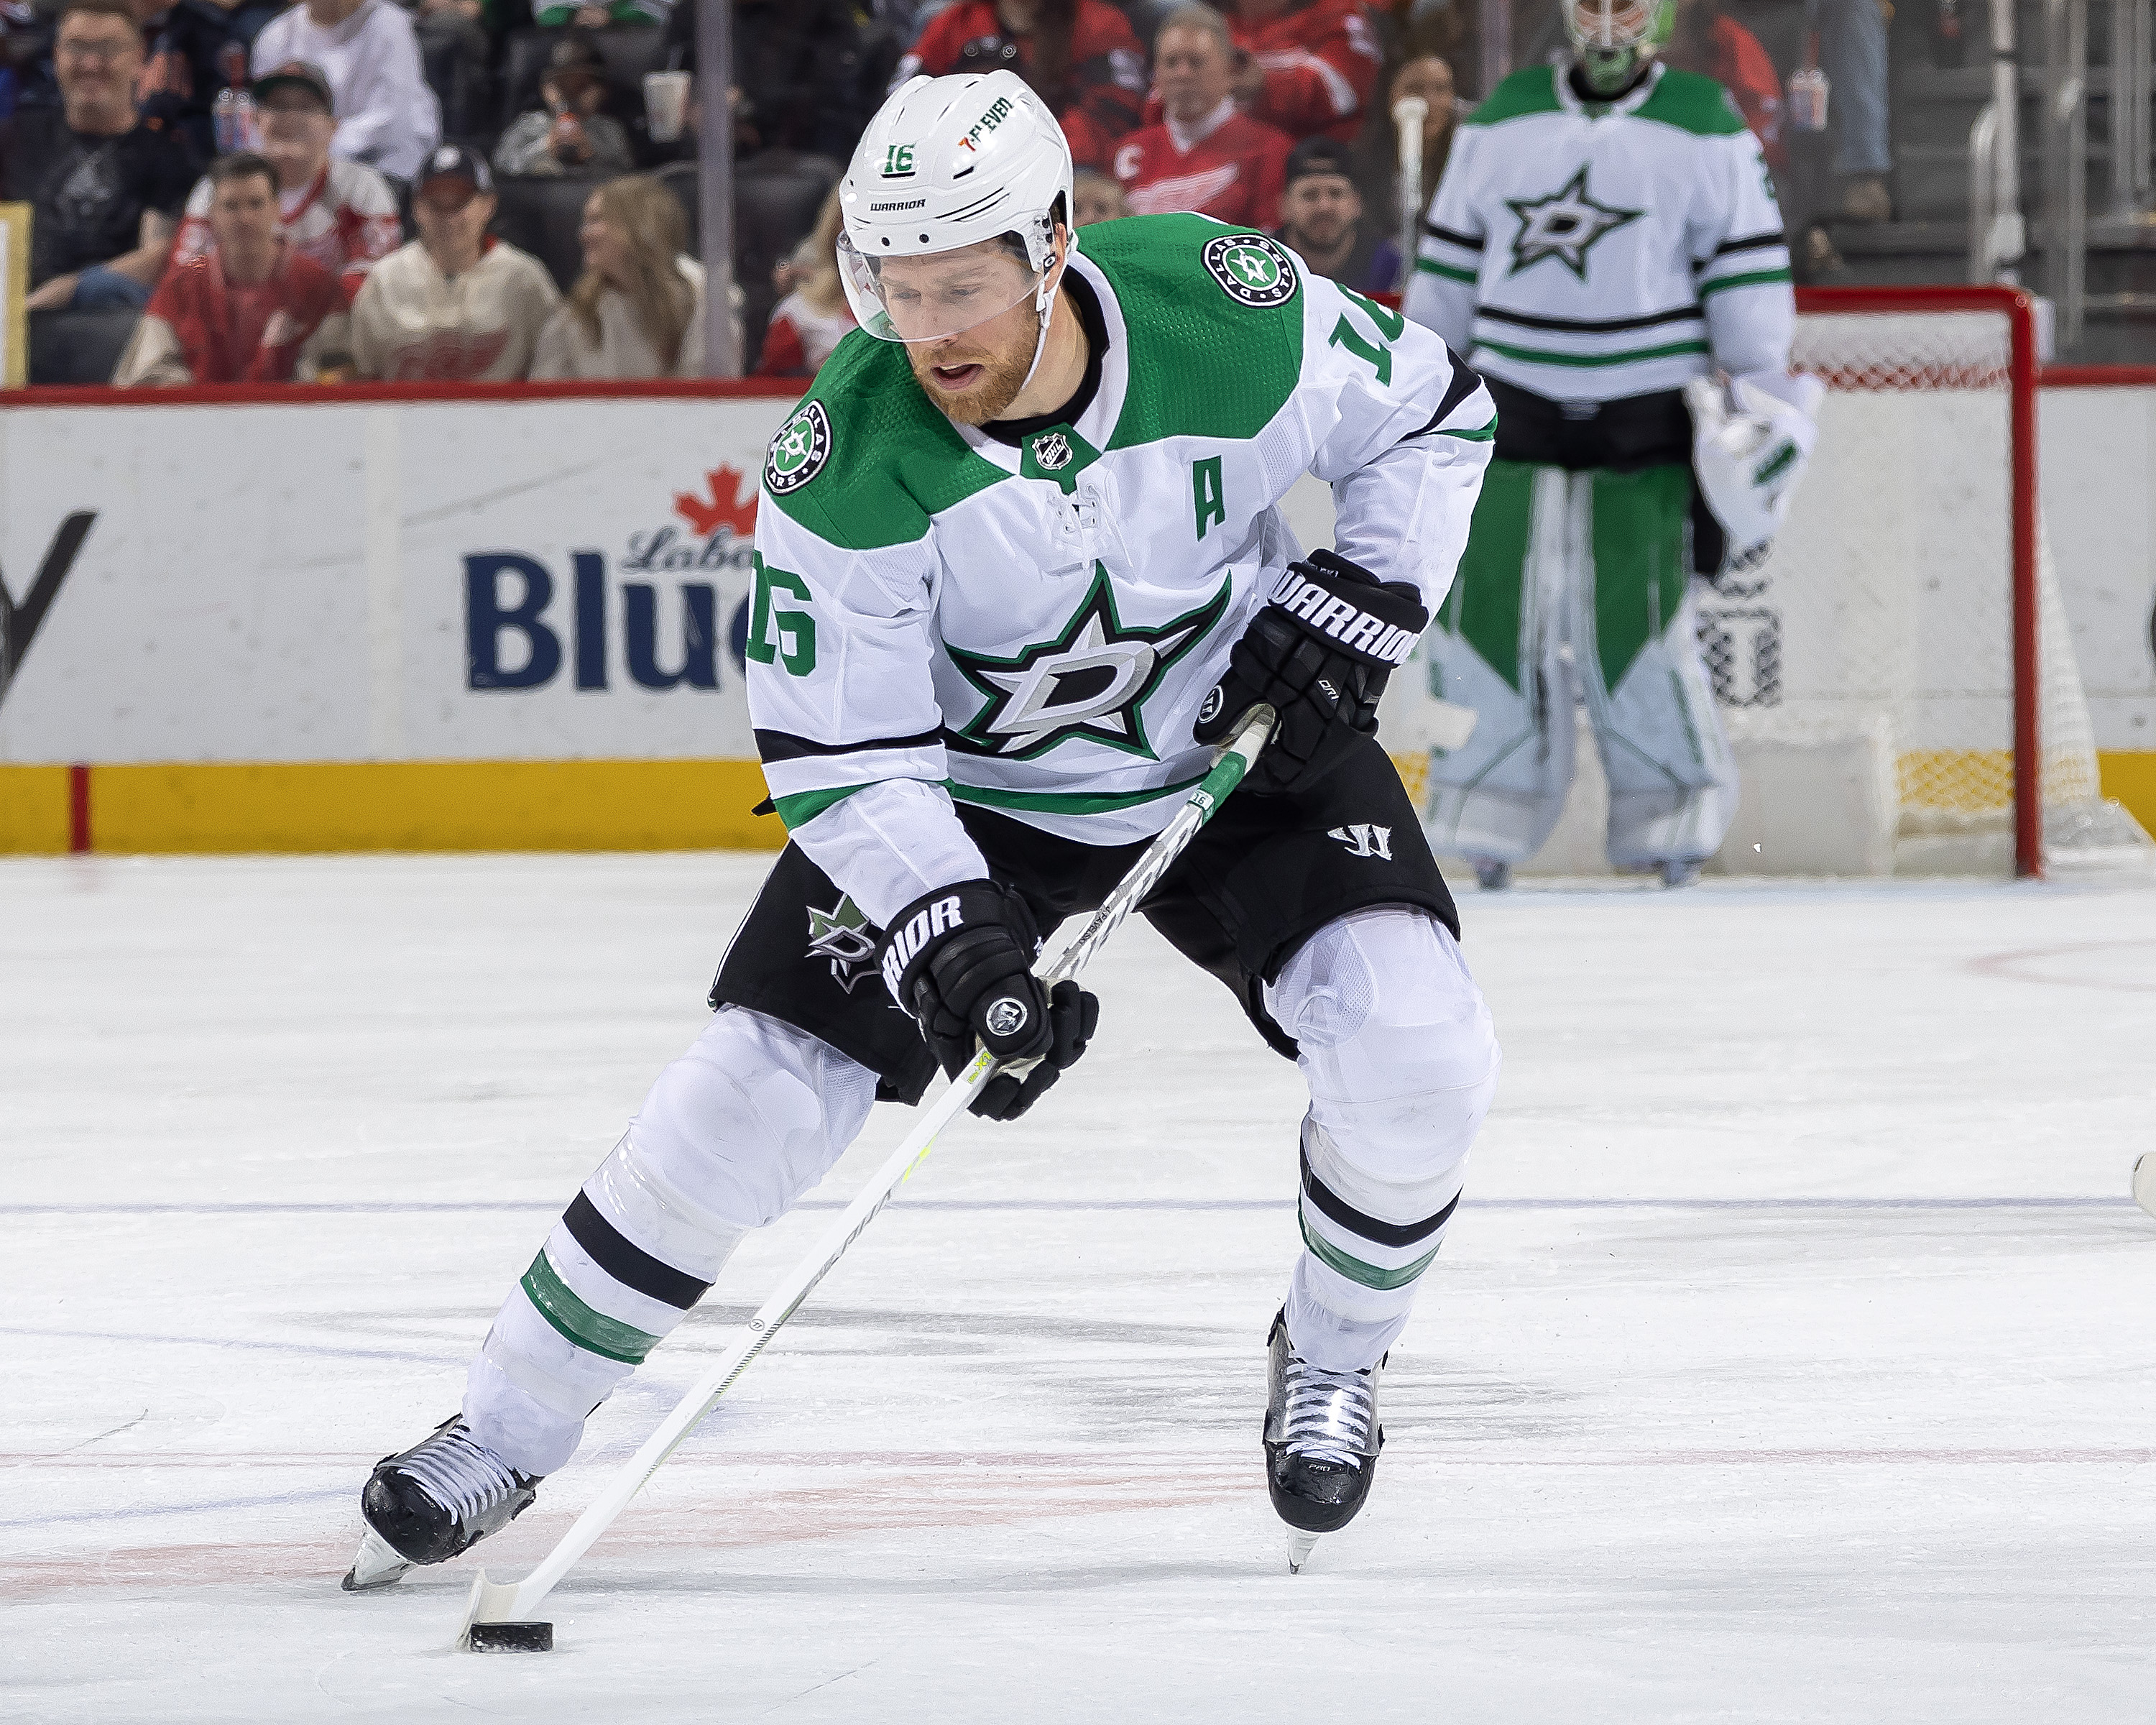 Joe Pavelski of the Dallas Stars skates up ice with the puck against the Detroit Red Wings during the second period of an NHL game at Little Caesars Arena on April 10, 2023 in Detroit, Michigan. Dallas defeated Detroit 6-1.